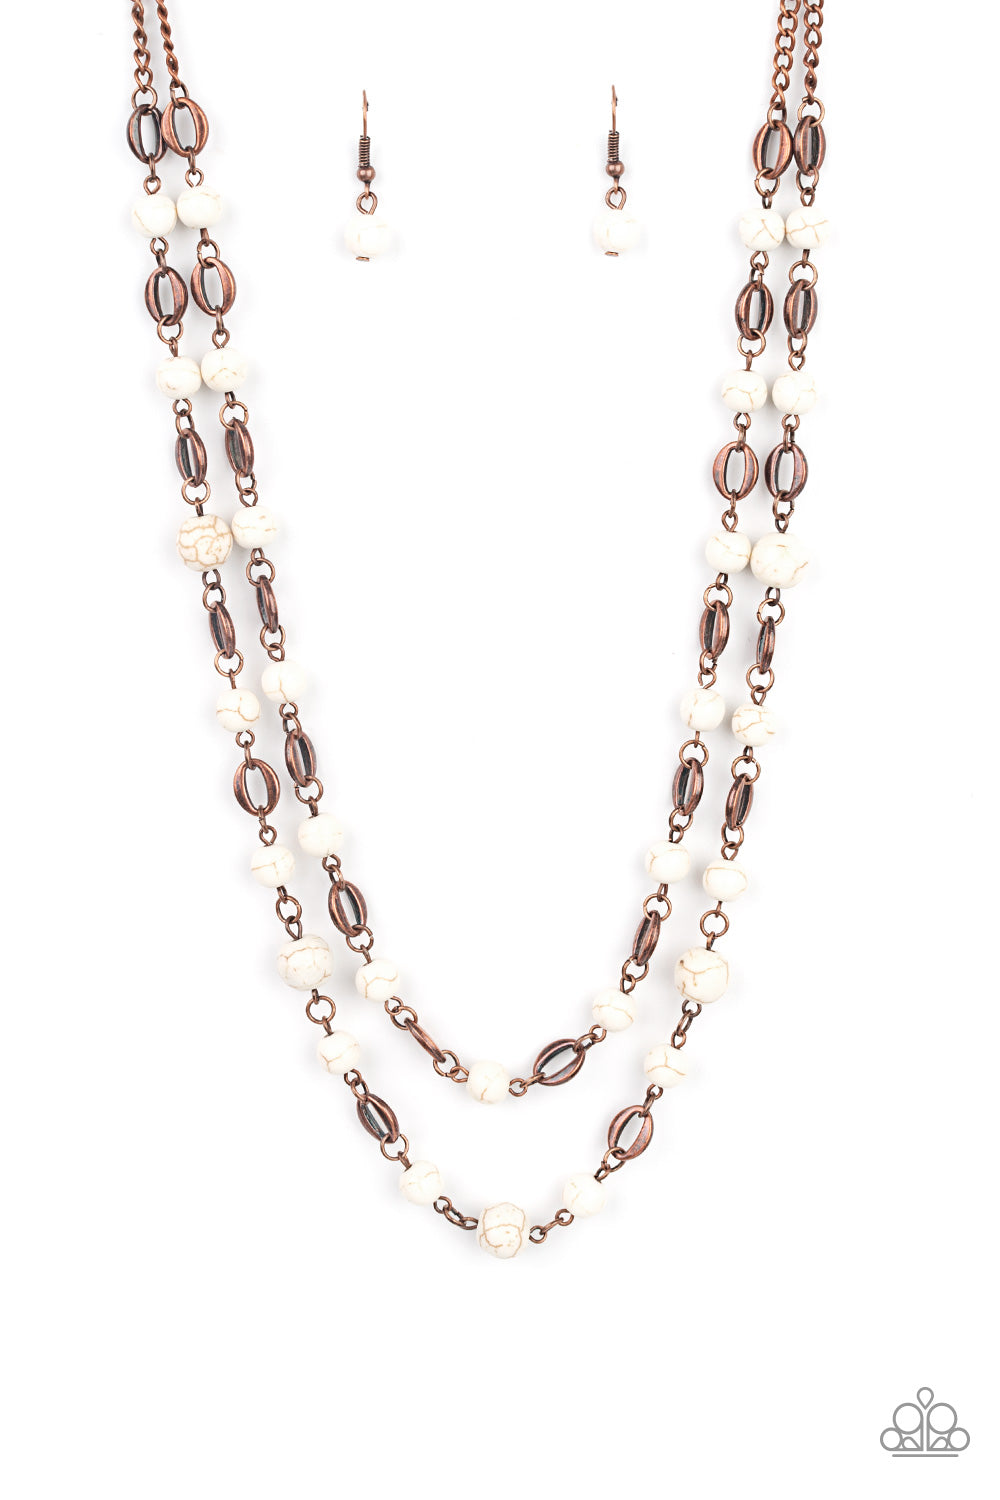 Essentially Earthy Copper Necklace- Paparazzi Accessories  An earthy collection of white stones link with copper oval frames below the collar, creating a rustically layered display. Features an adjustable clasp closure.  Sold as one individual necklace. Includes one pair of matching earrings.